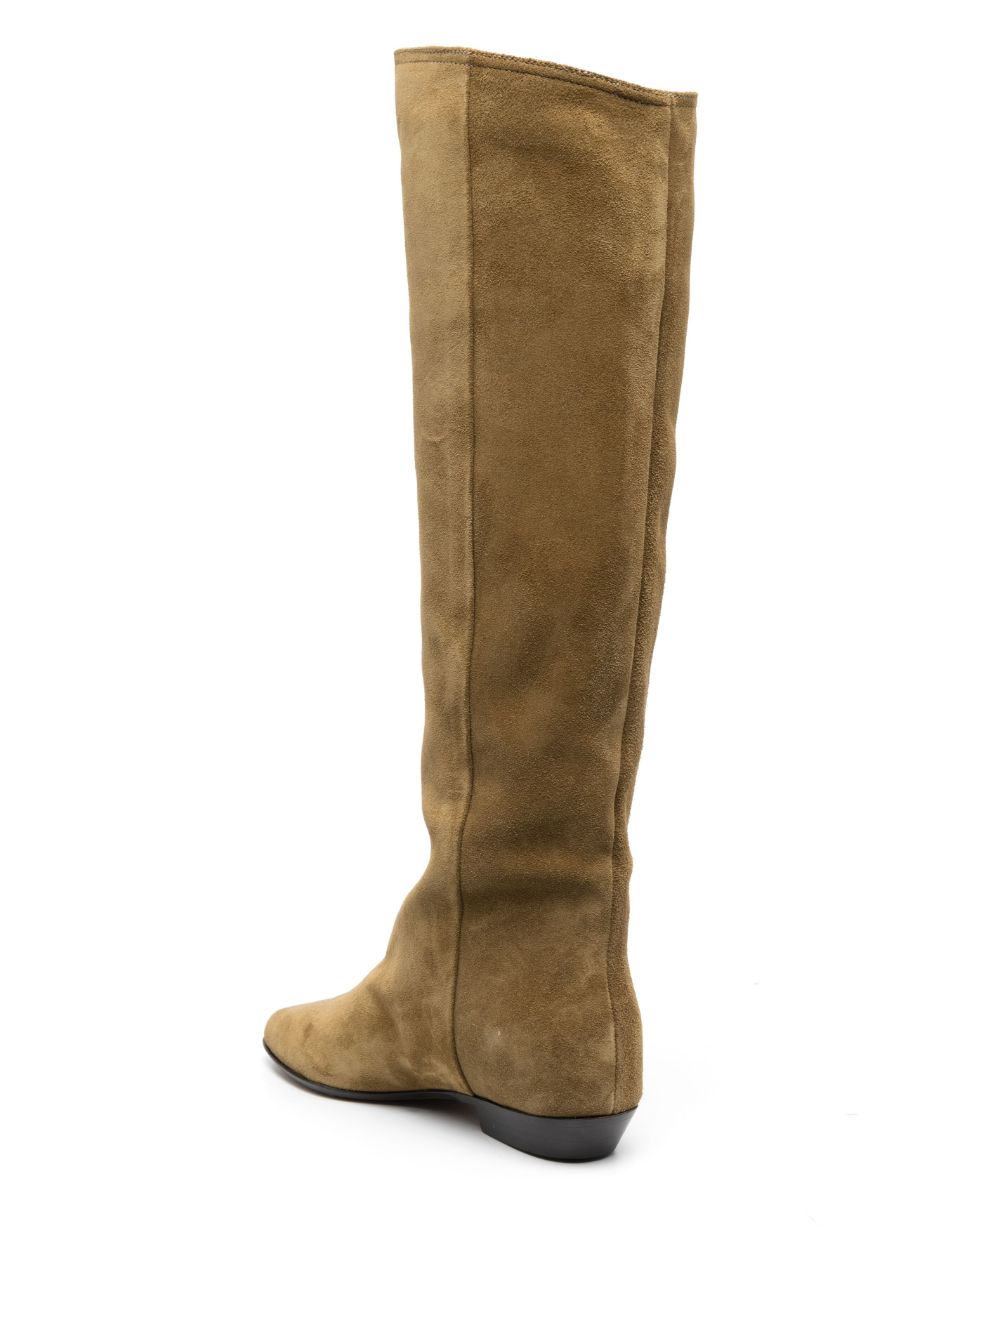 Suede Knee Boots for Women - FW23 Collection